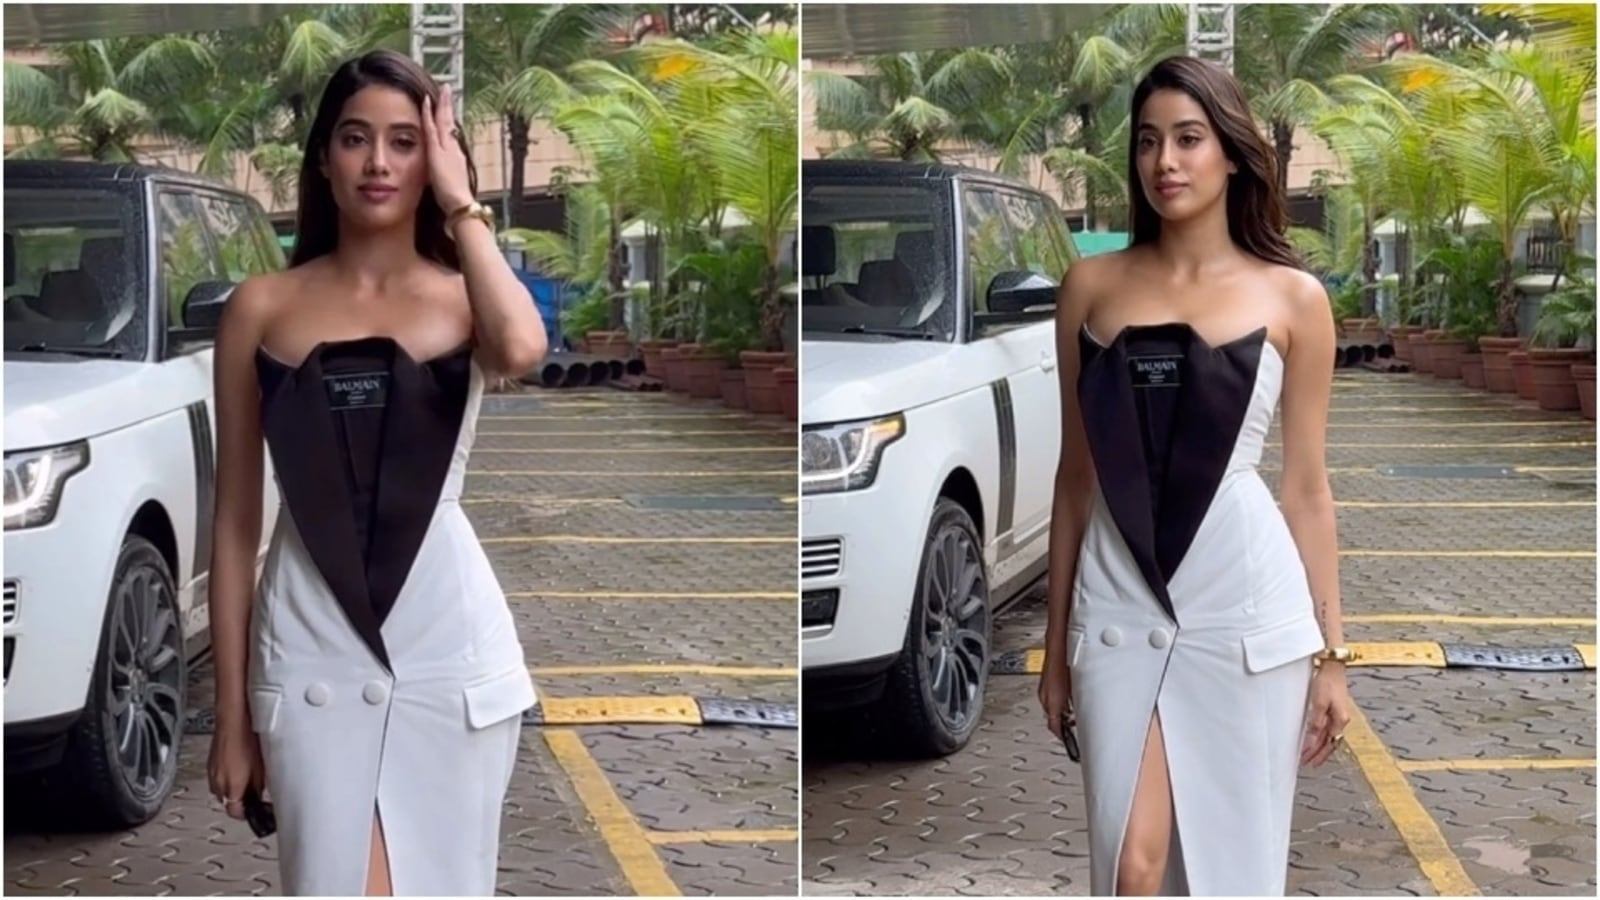 Janhvi Kapoor’s quirky blazer dress from Balmain makes fans question her style: ‘This looks so bad’ | Fashion Trends